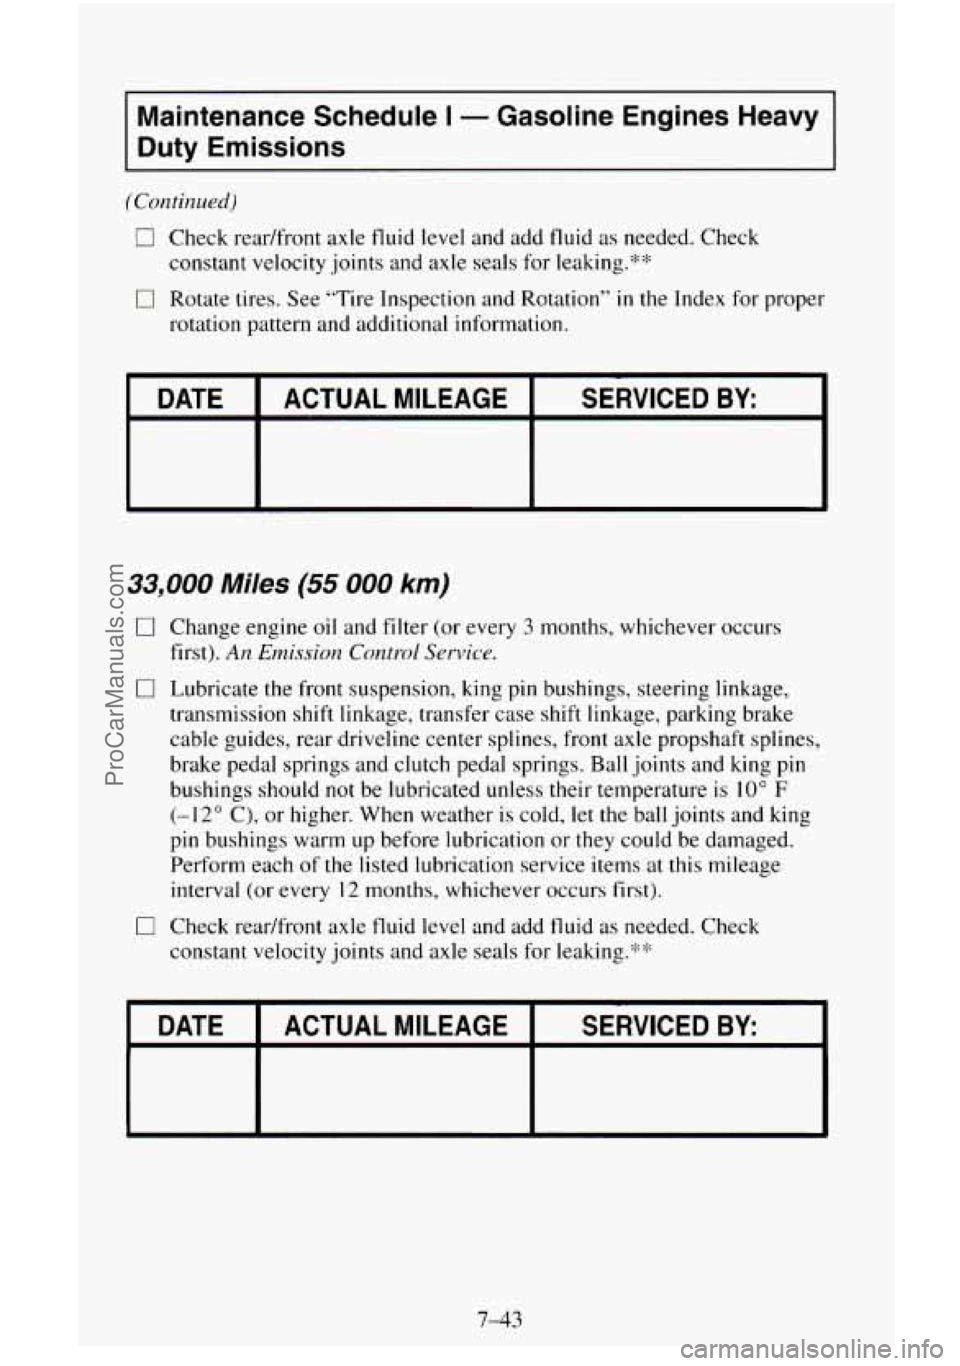 CHEVROLET SUBURBAN 1995 Service Manual Maintenance  Schedule I - Gasoline  Engines  Heavy 
Duty Emissions 
(Continued) 
0 Check readfront  axle  fluid  level and add fluid as needed. Check 
constant  velocity joints and axle  seals  for  l